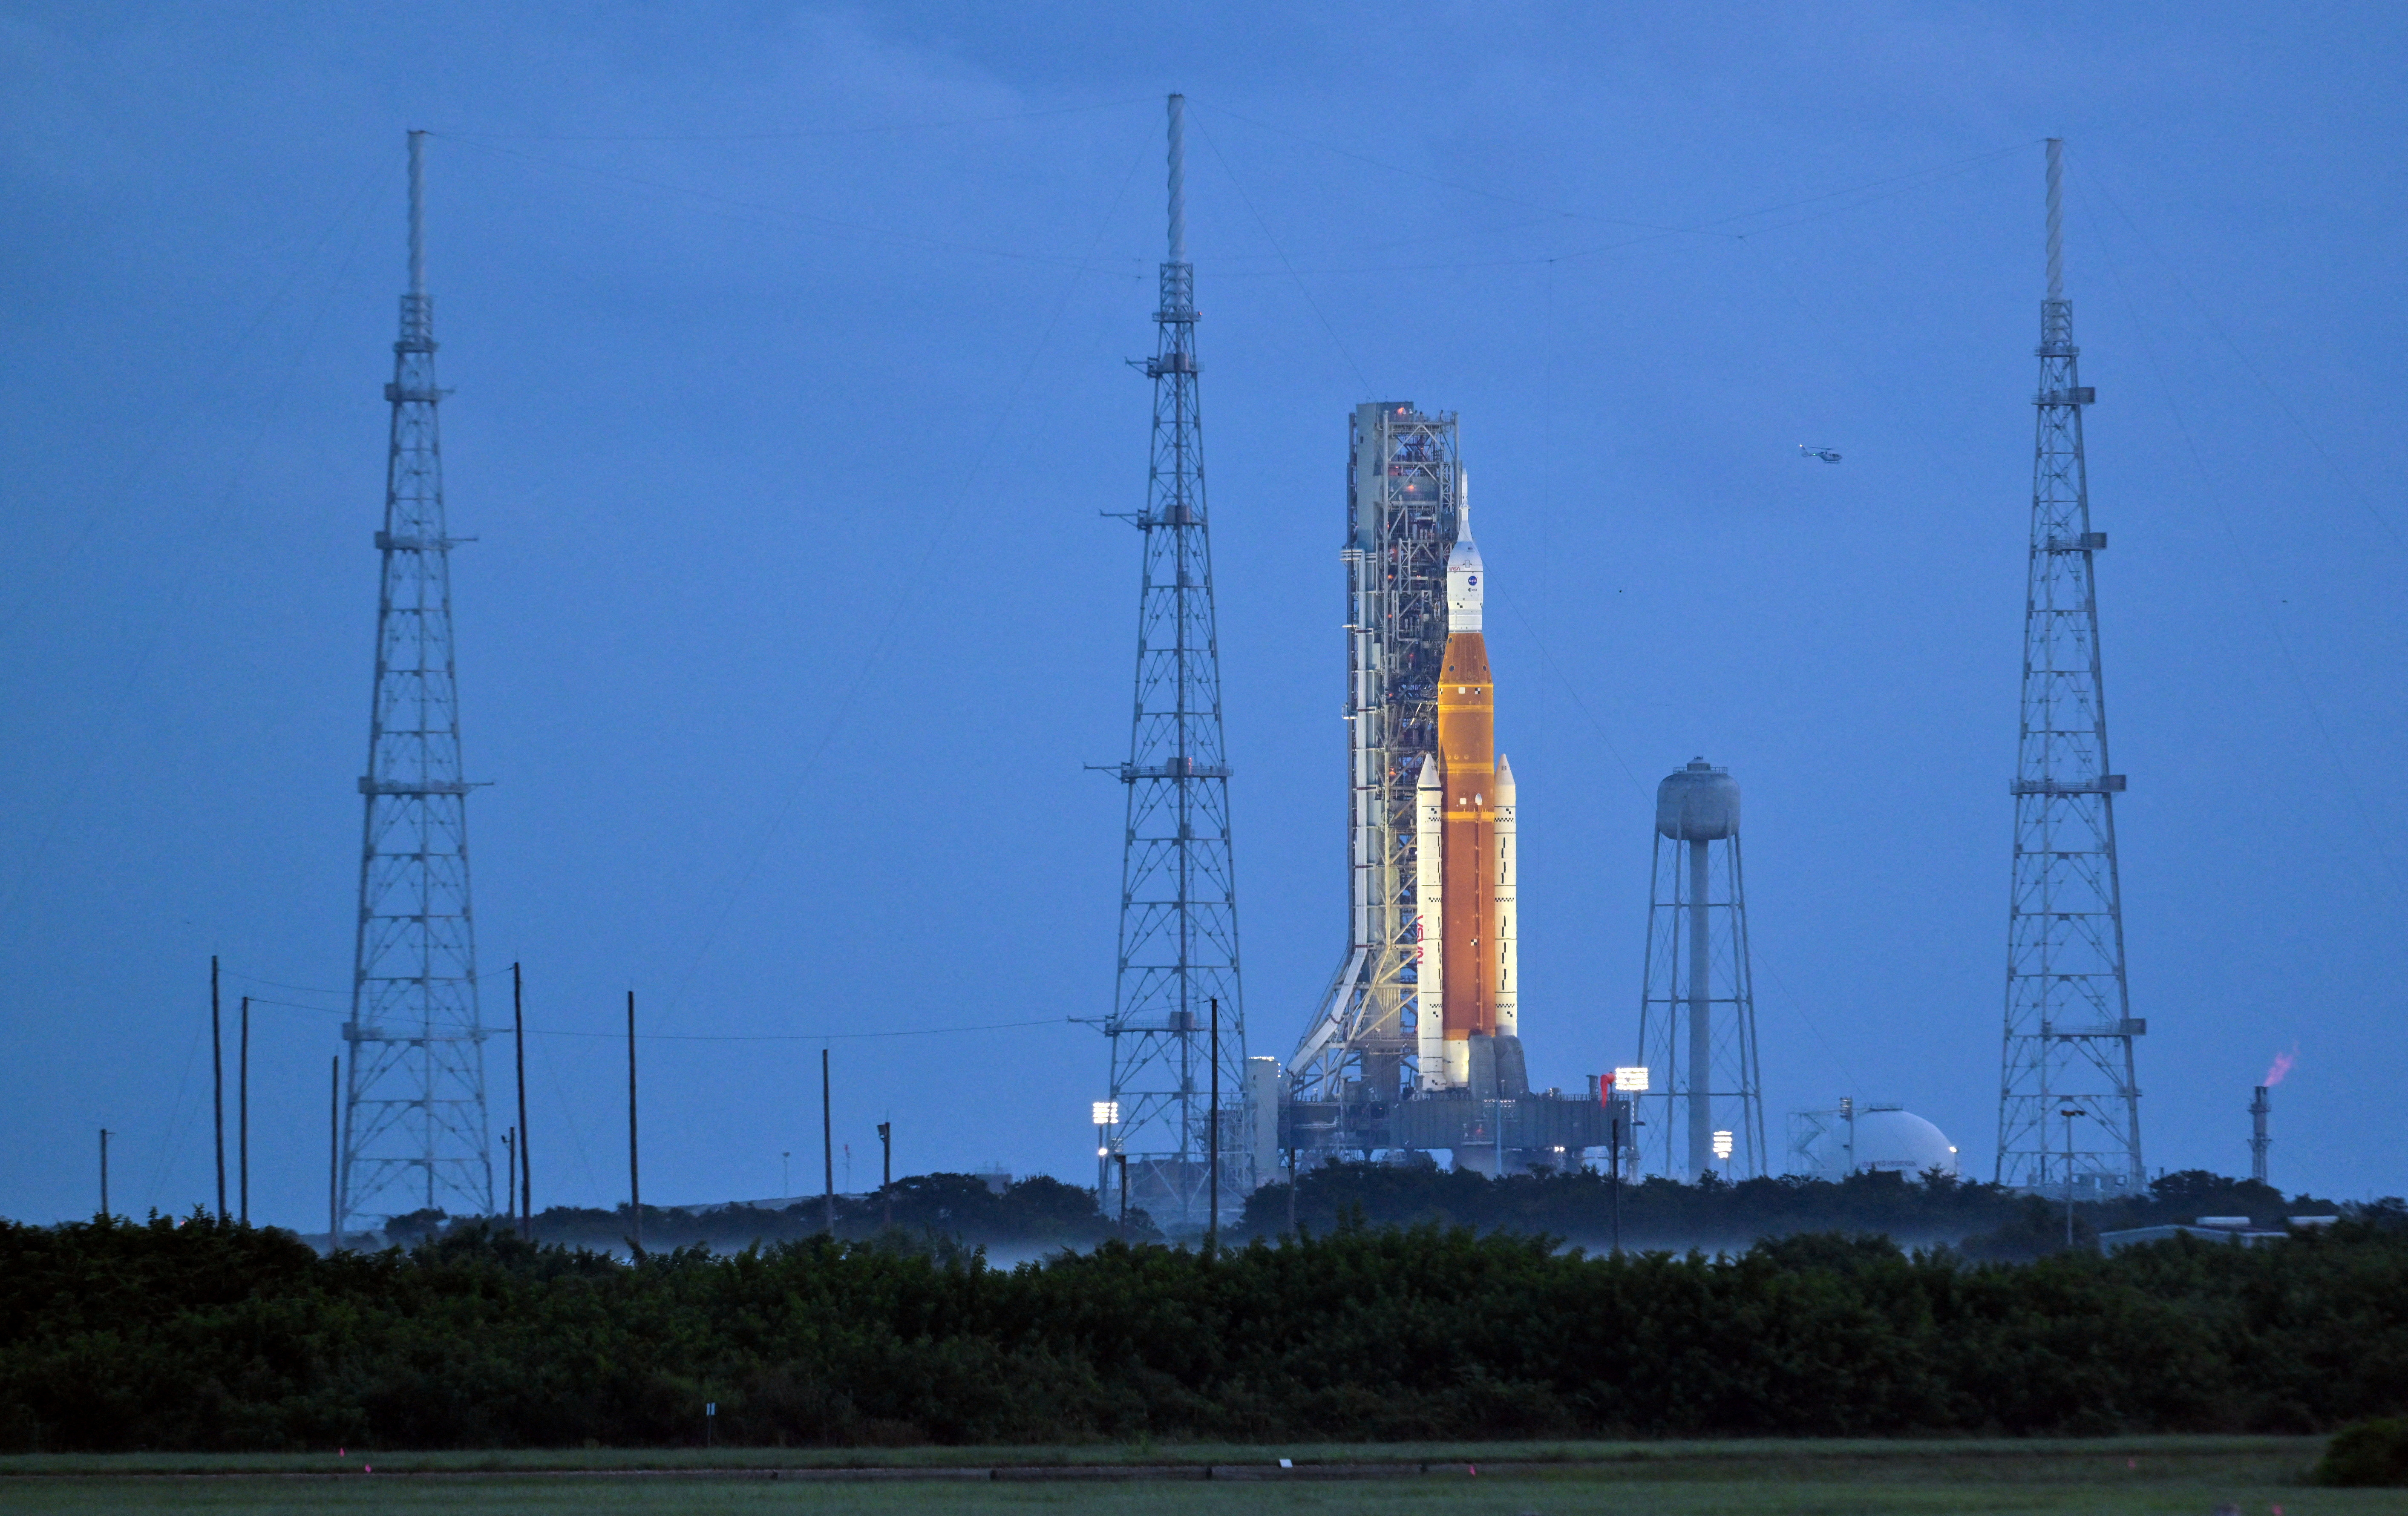 FILE PHOTO: NASA's next-generation moon rocket, the Space Launch System (SLS) with the Orion crew capsule perched on top, stands on launch complex 39B as it is prepared for launch for the Artemis 1 mission at Cape Canaveral, Florida, U.S. September 3, 2022.  REUTERS/Steve Nesius/File Photo